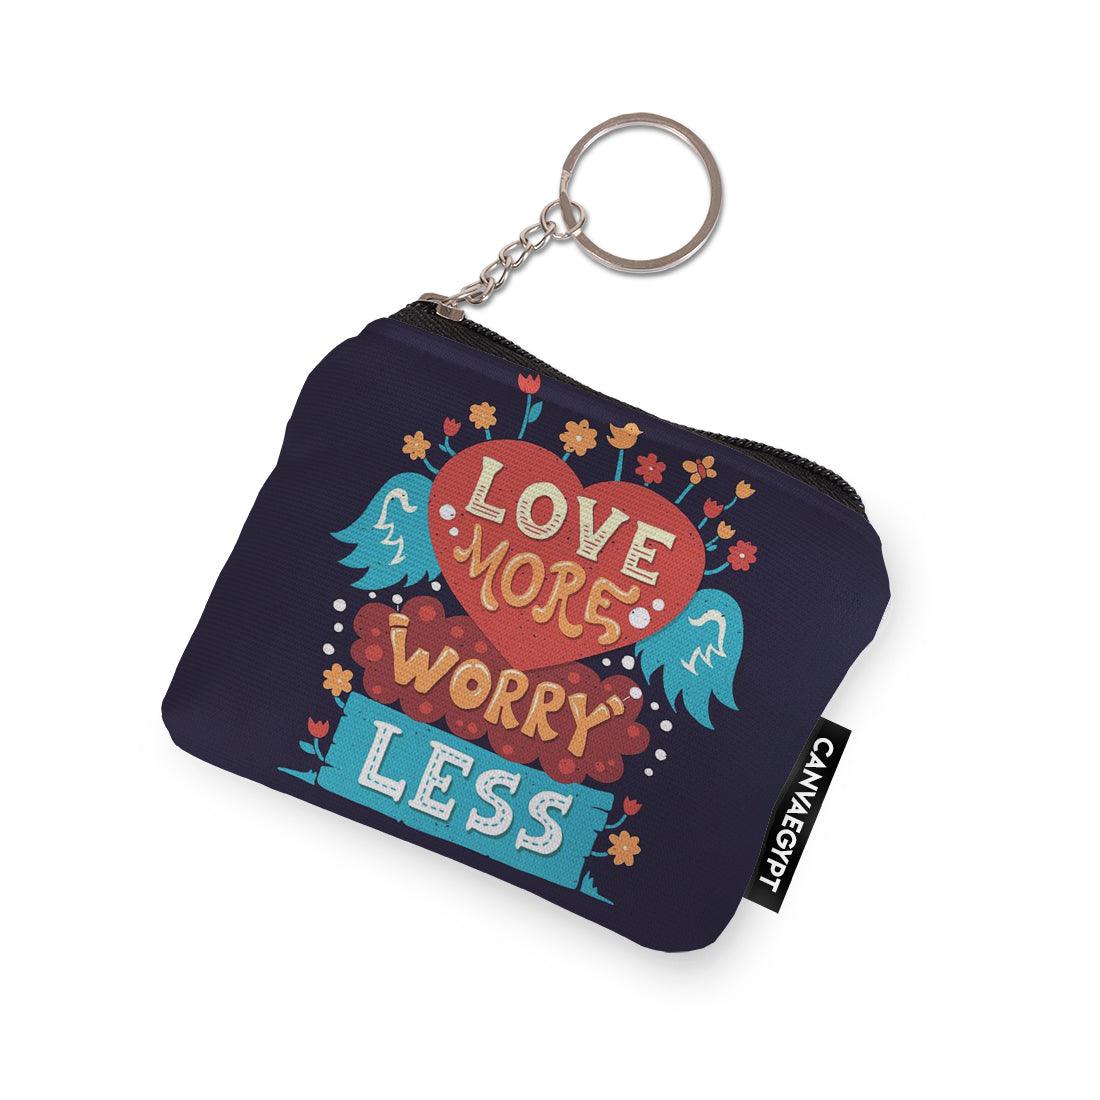 Coin Pocket Love More Worry Less